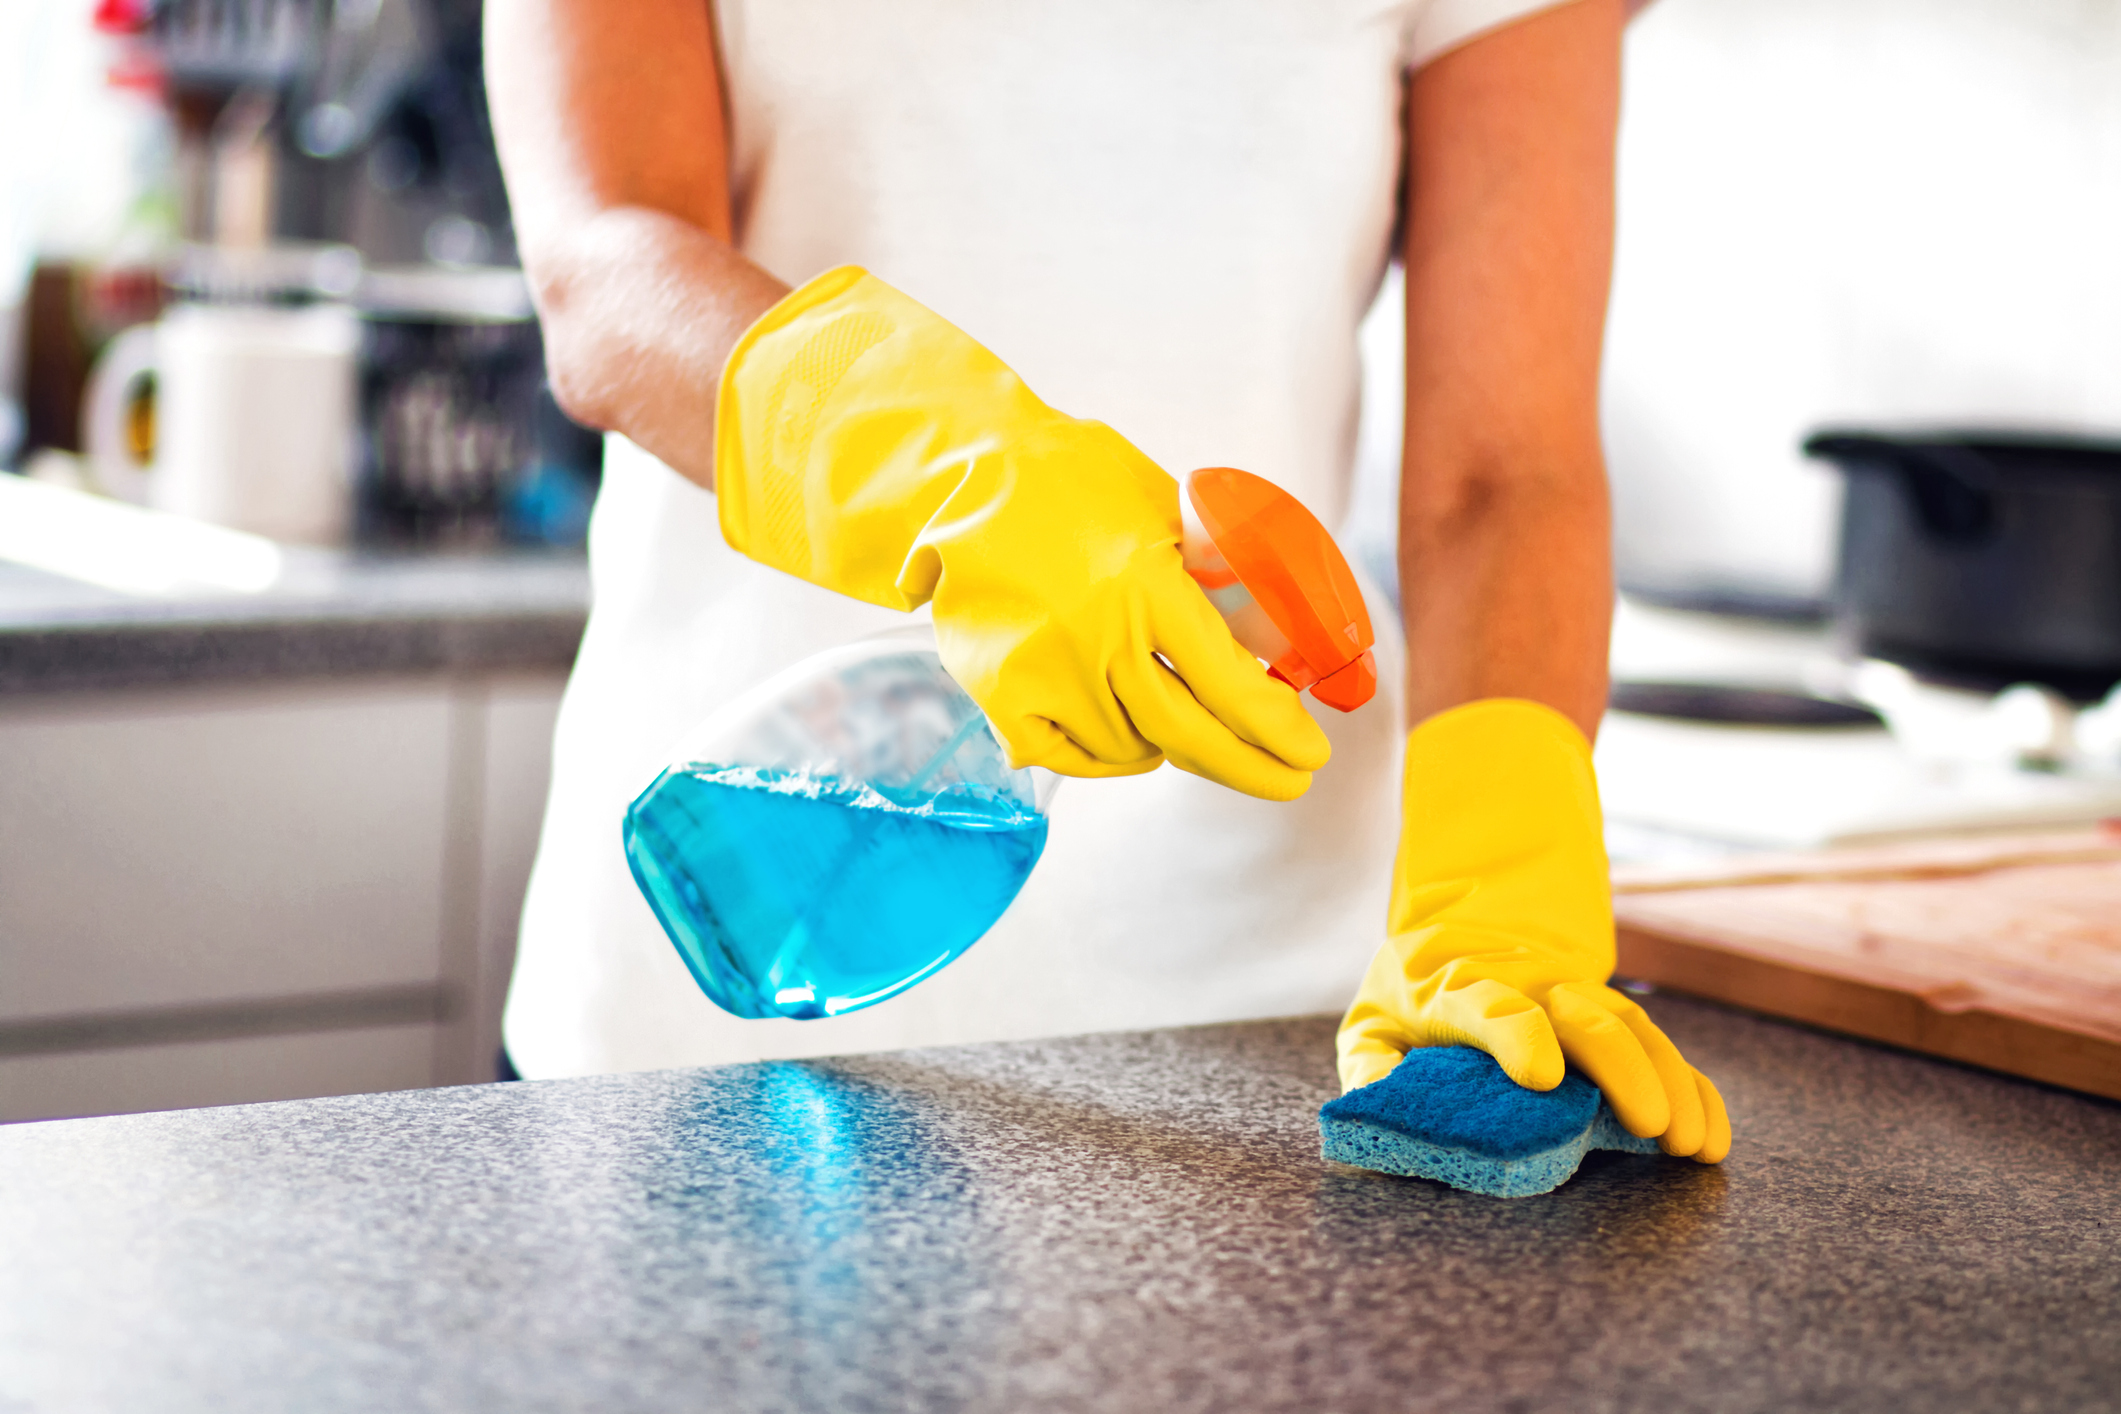 How to Clean and Disinfect a Kitchen